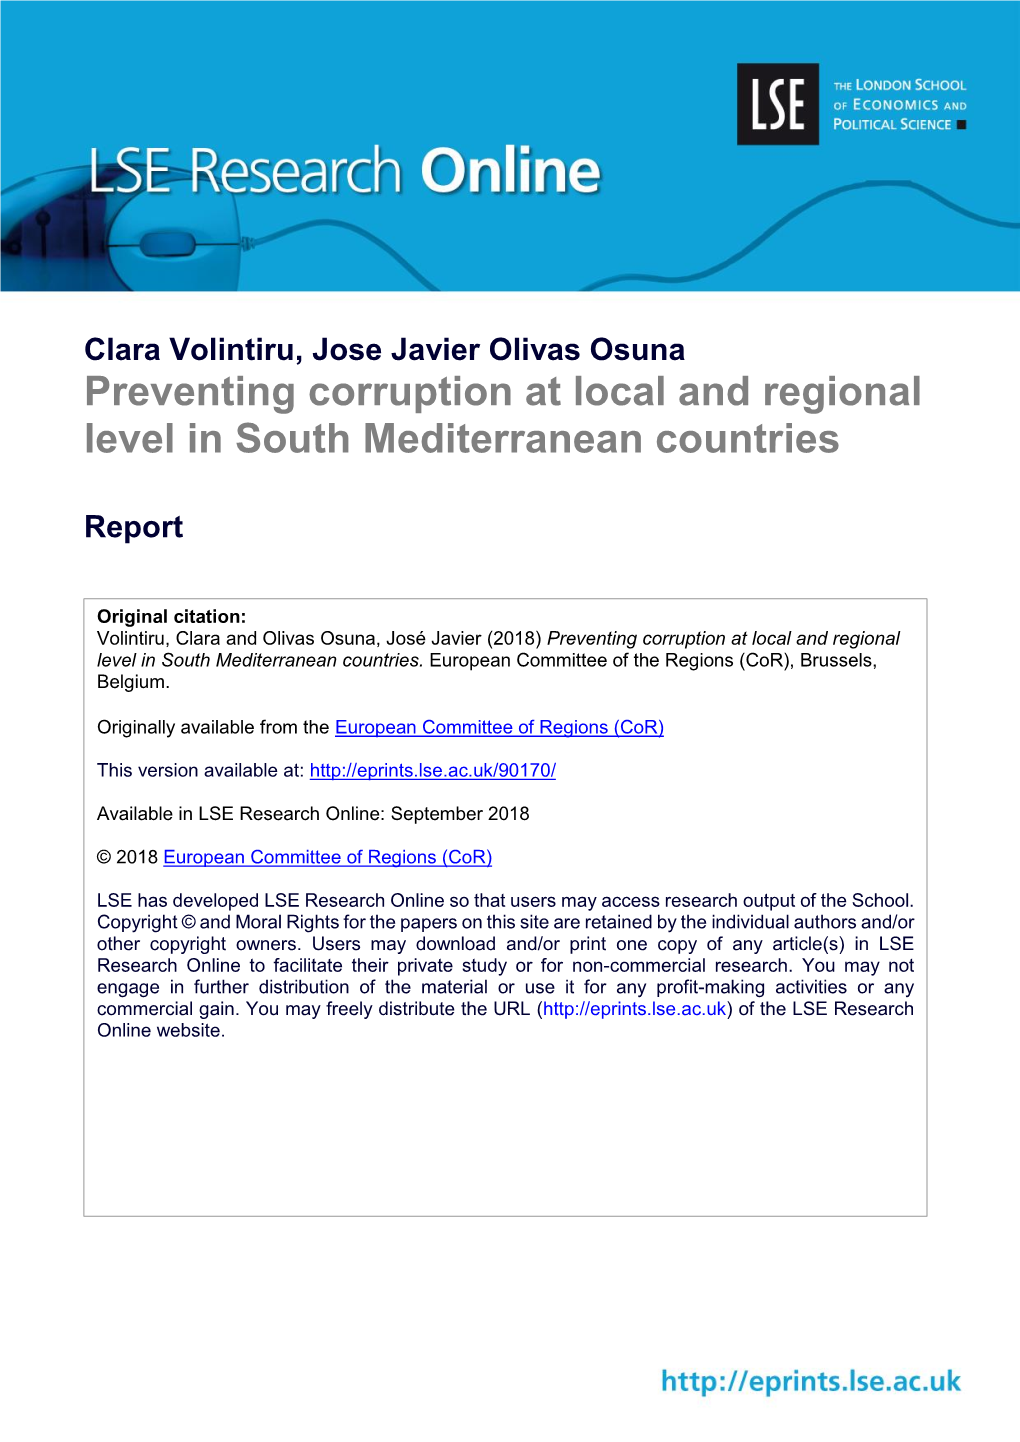 Preventing Corruption at Local and Regional Level in South Mediterranean Countries